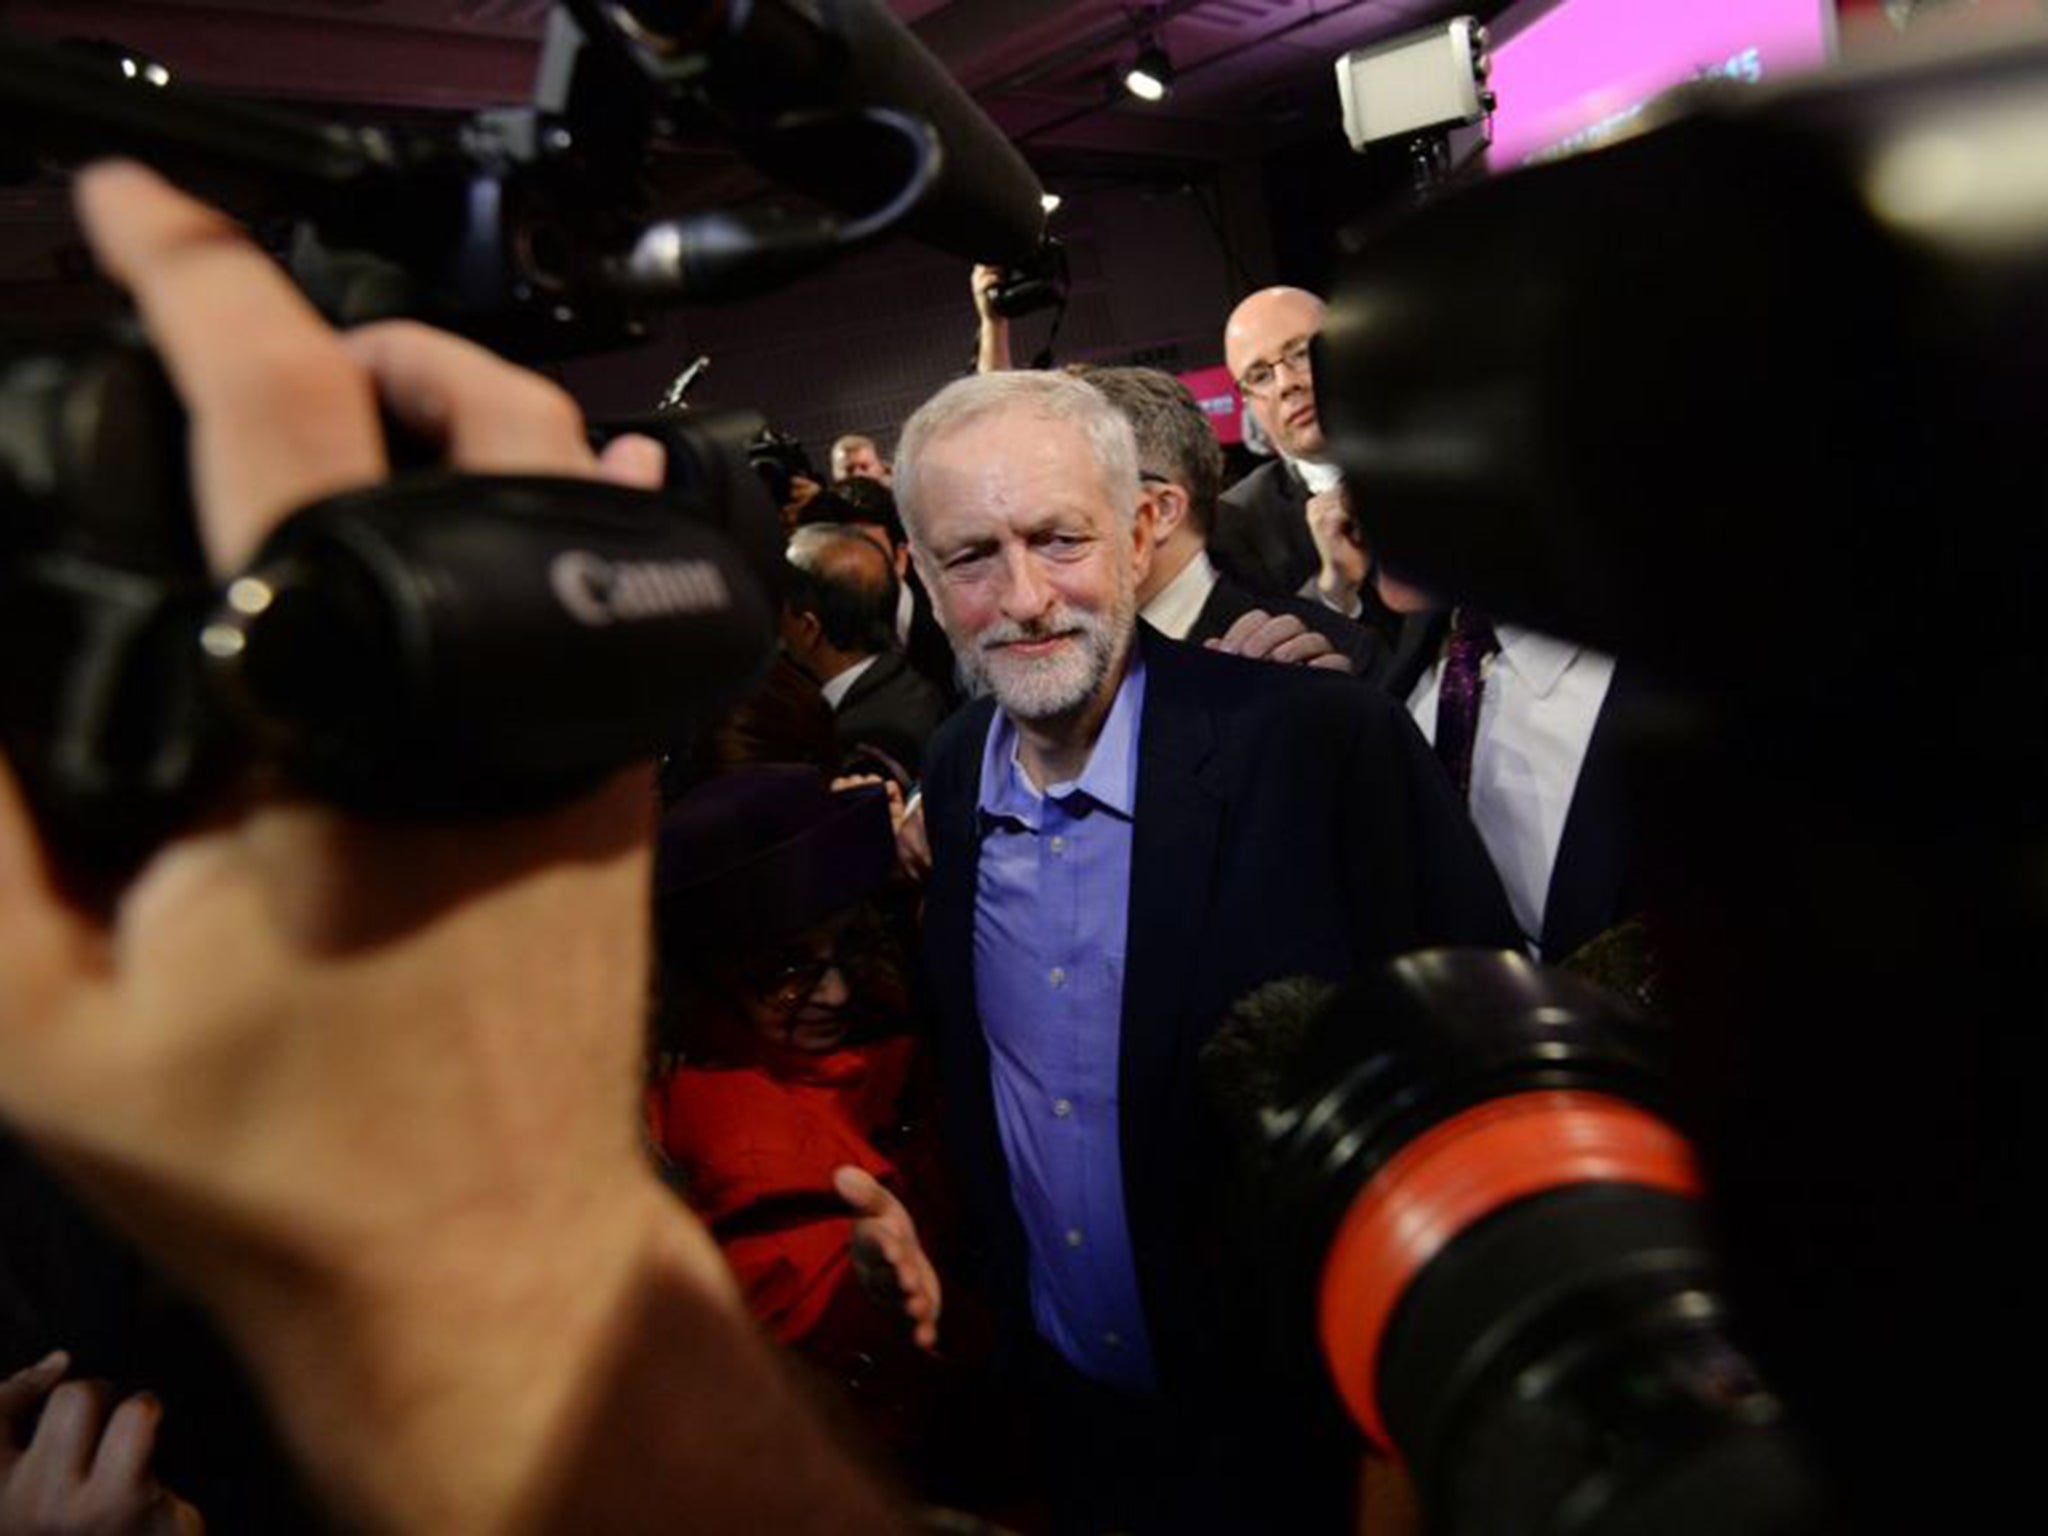 A YouGov poll at the beginning of August found that 30 per cent of Corbyn supporters intended to vote for him even though they didn’t think that Labour was likely to win the 2020 election with him as leader